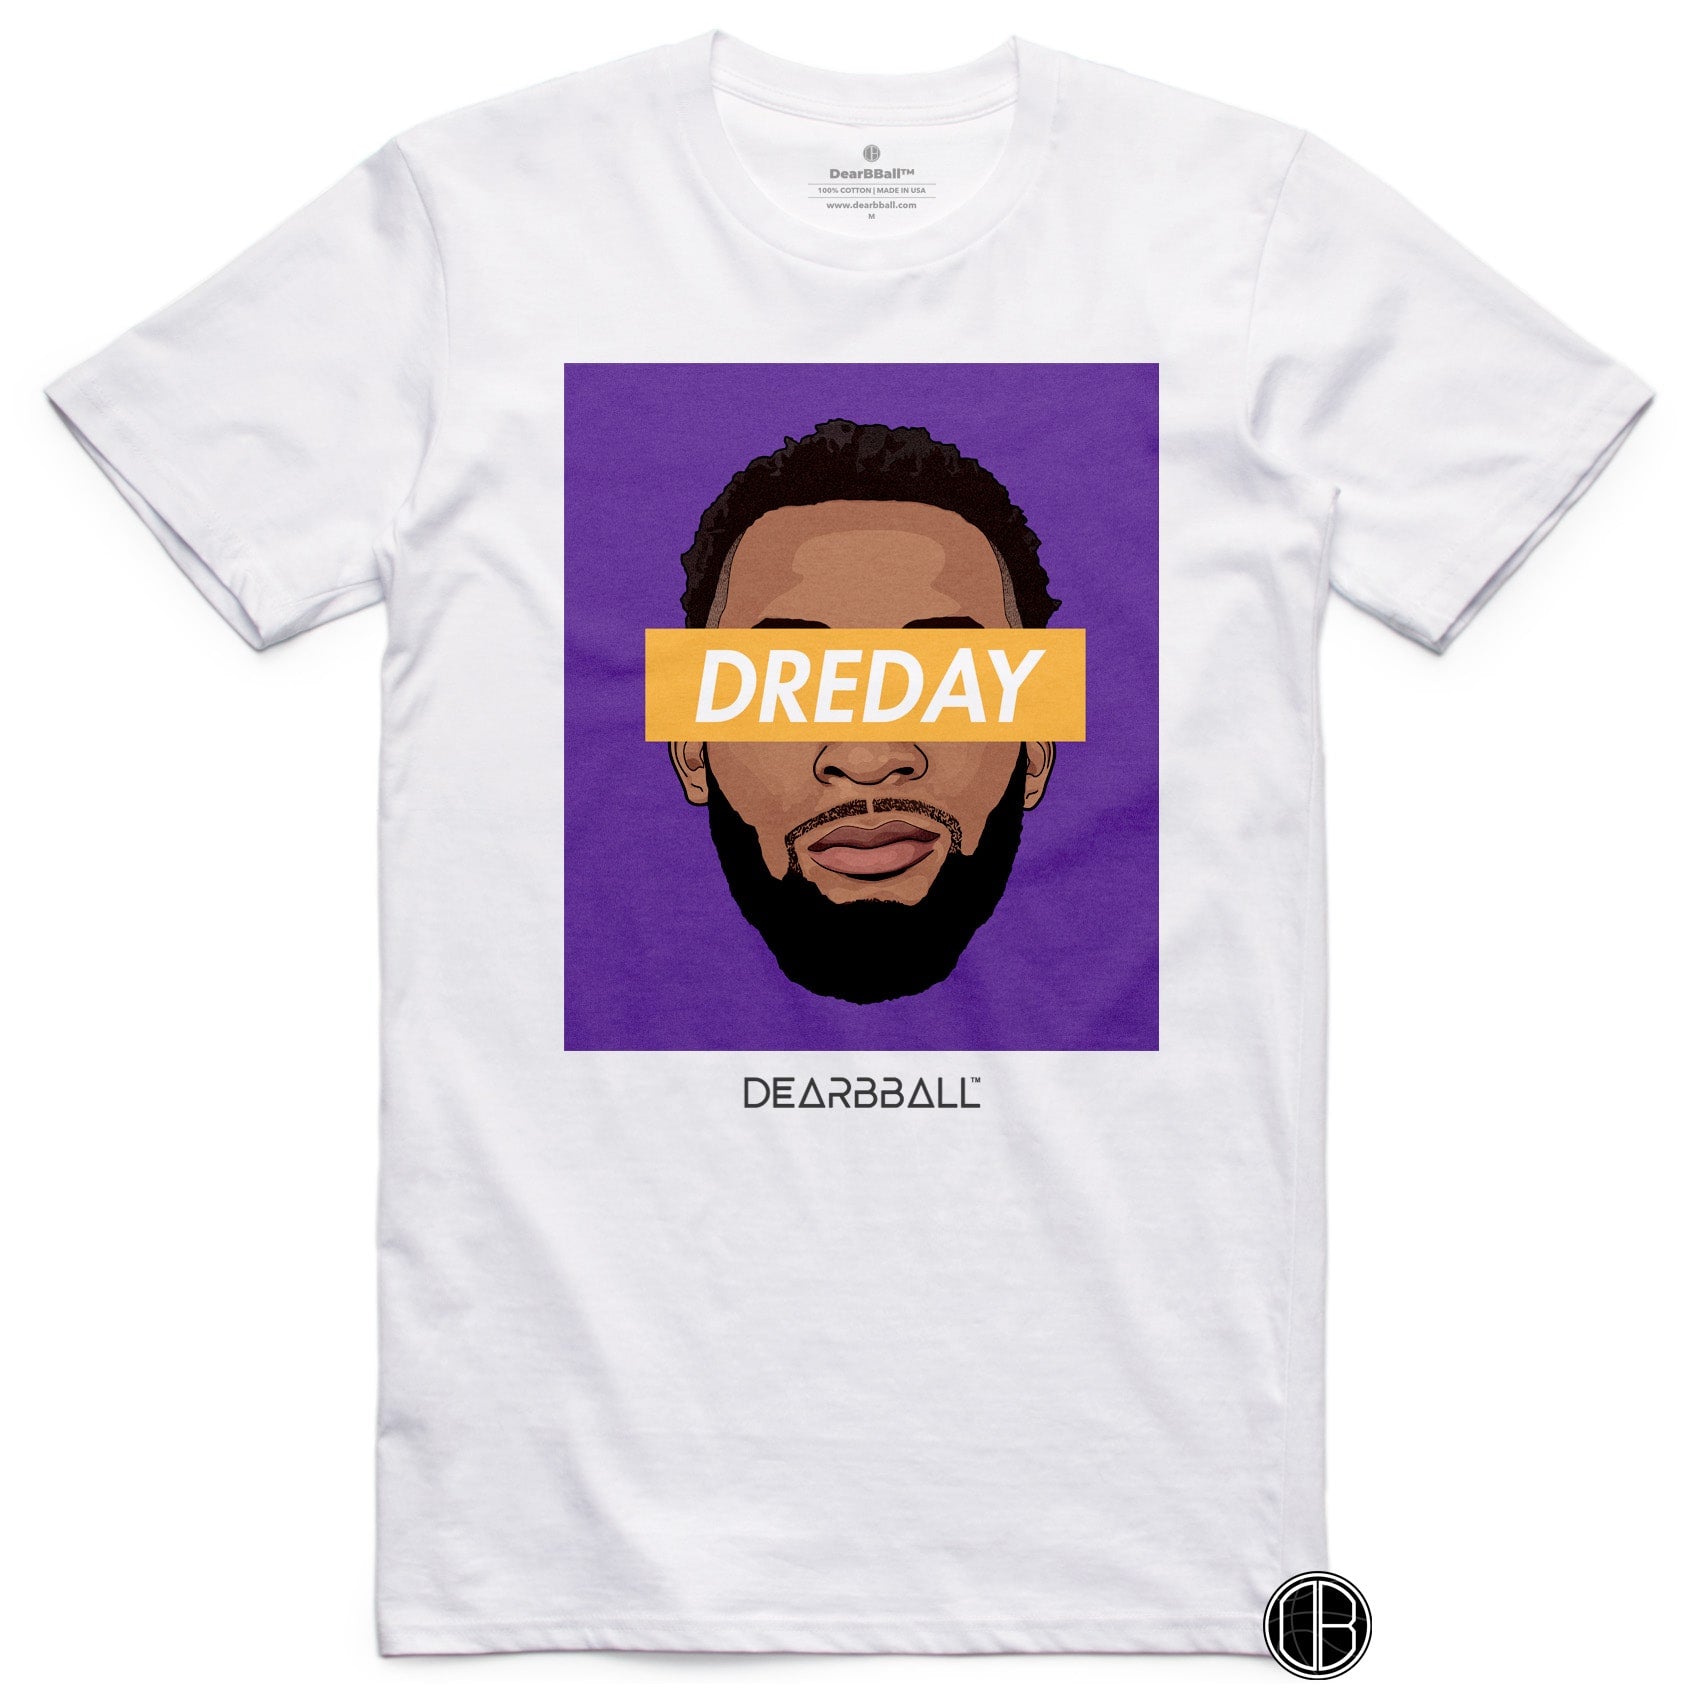 Andre Drummond T-Shirt Bio - DRE DAY Purple Los Angeles Lakers Basketball Dearbball blanc